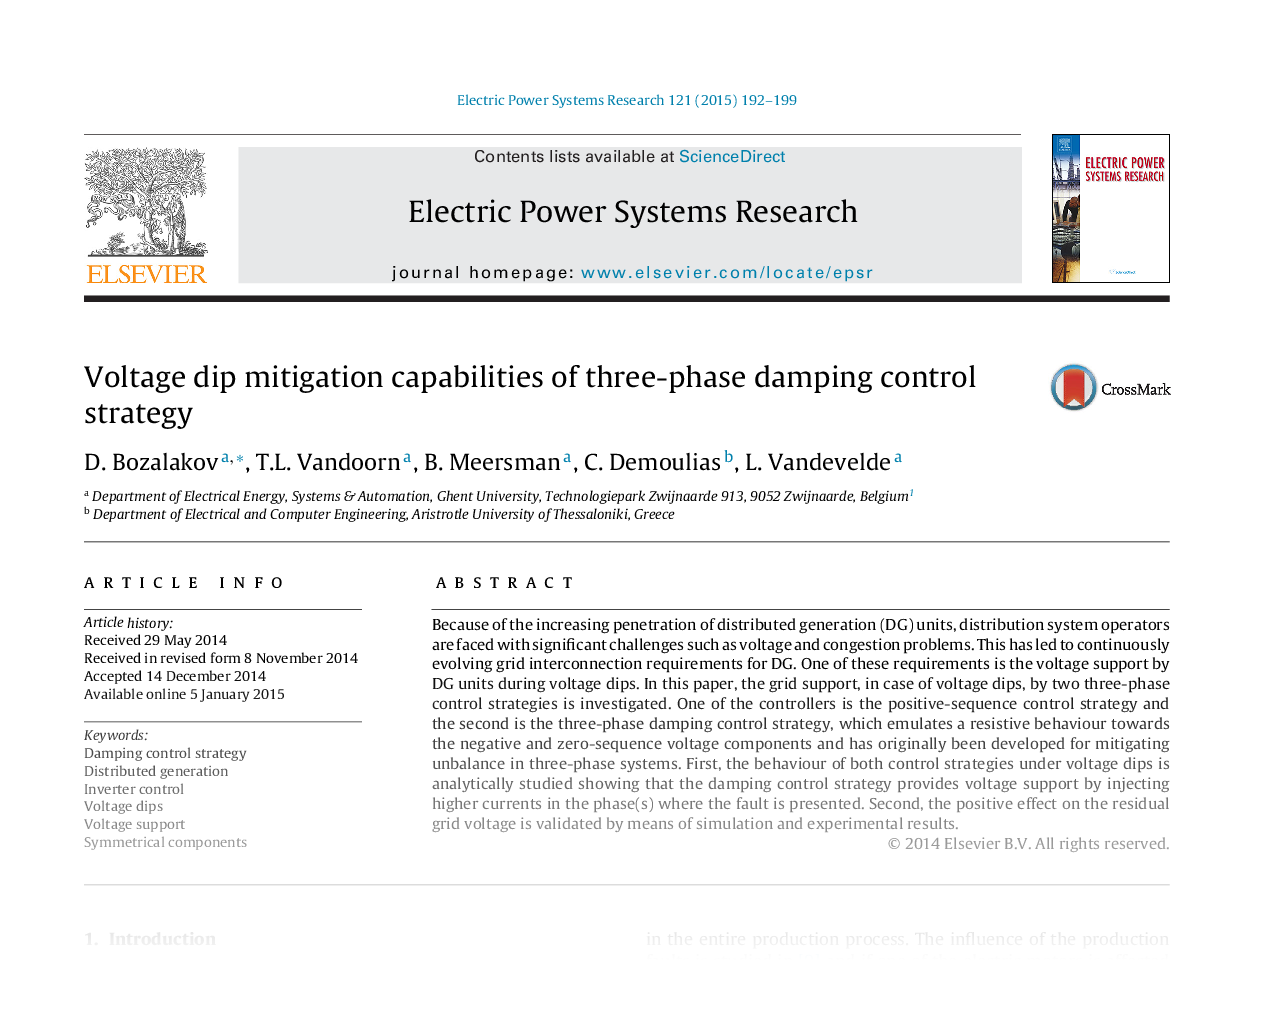 Voltage dip mitigation capabilities of three-phase damping control strategy